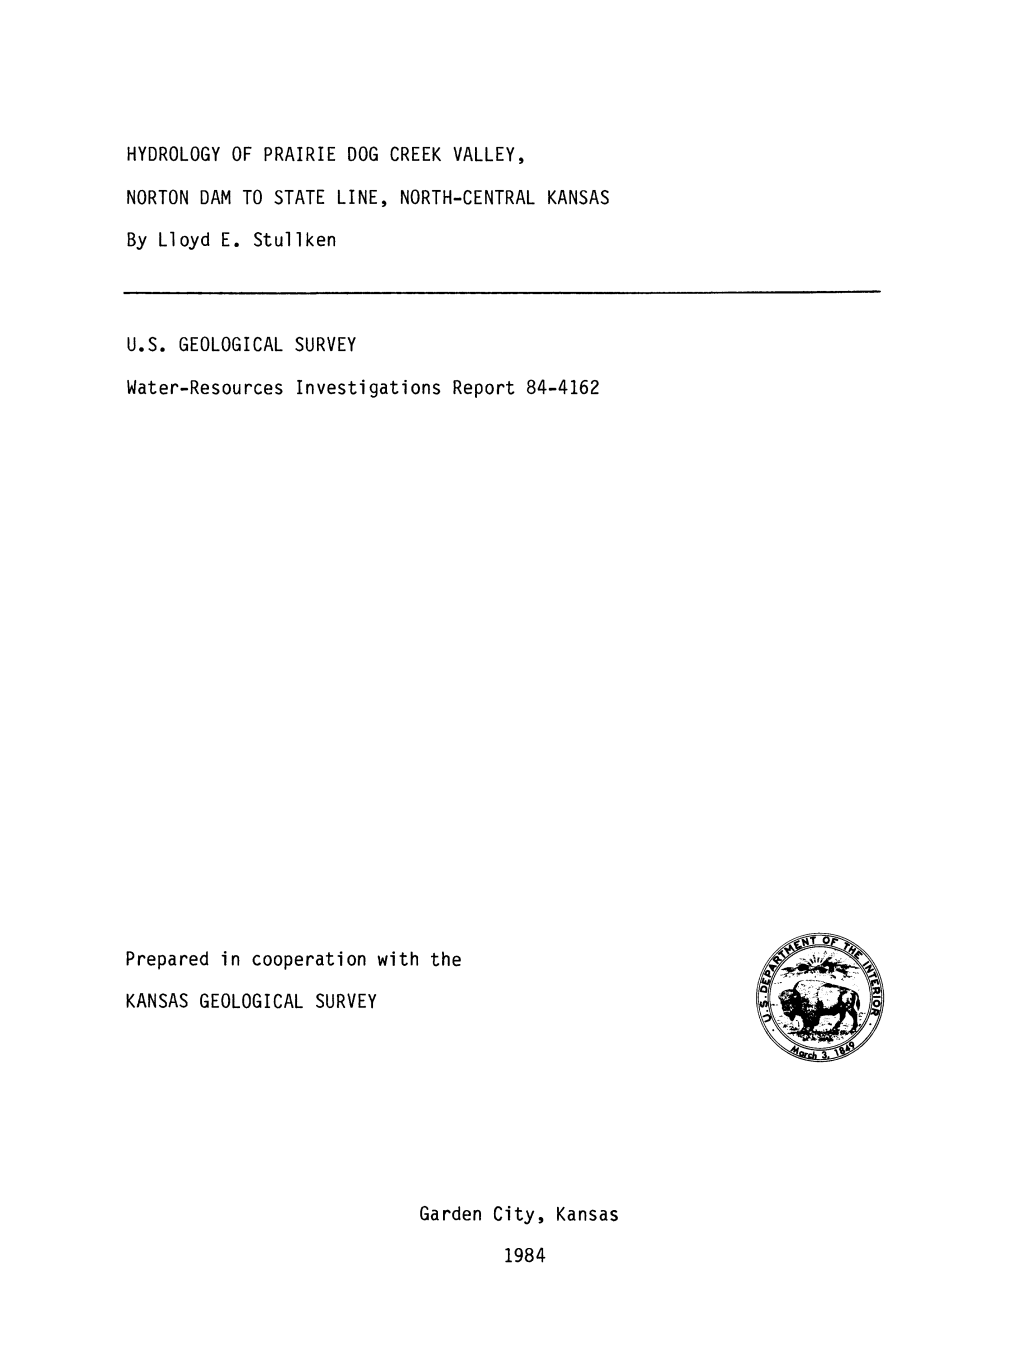 By Lloyd E. Stullken Water-Resources Investigations Report 84-4162